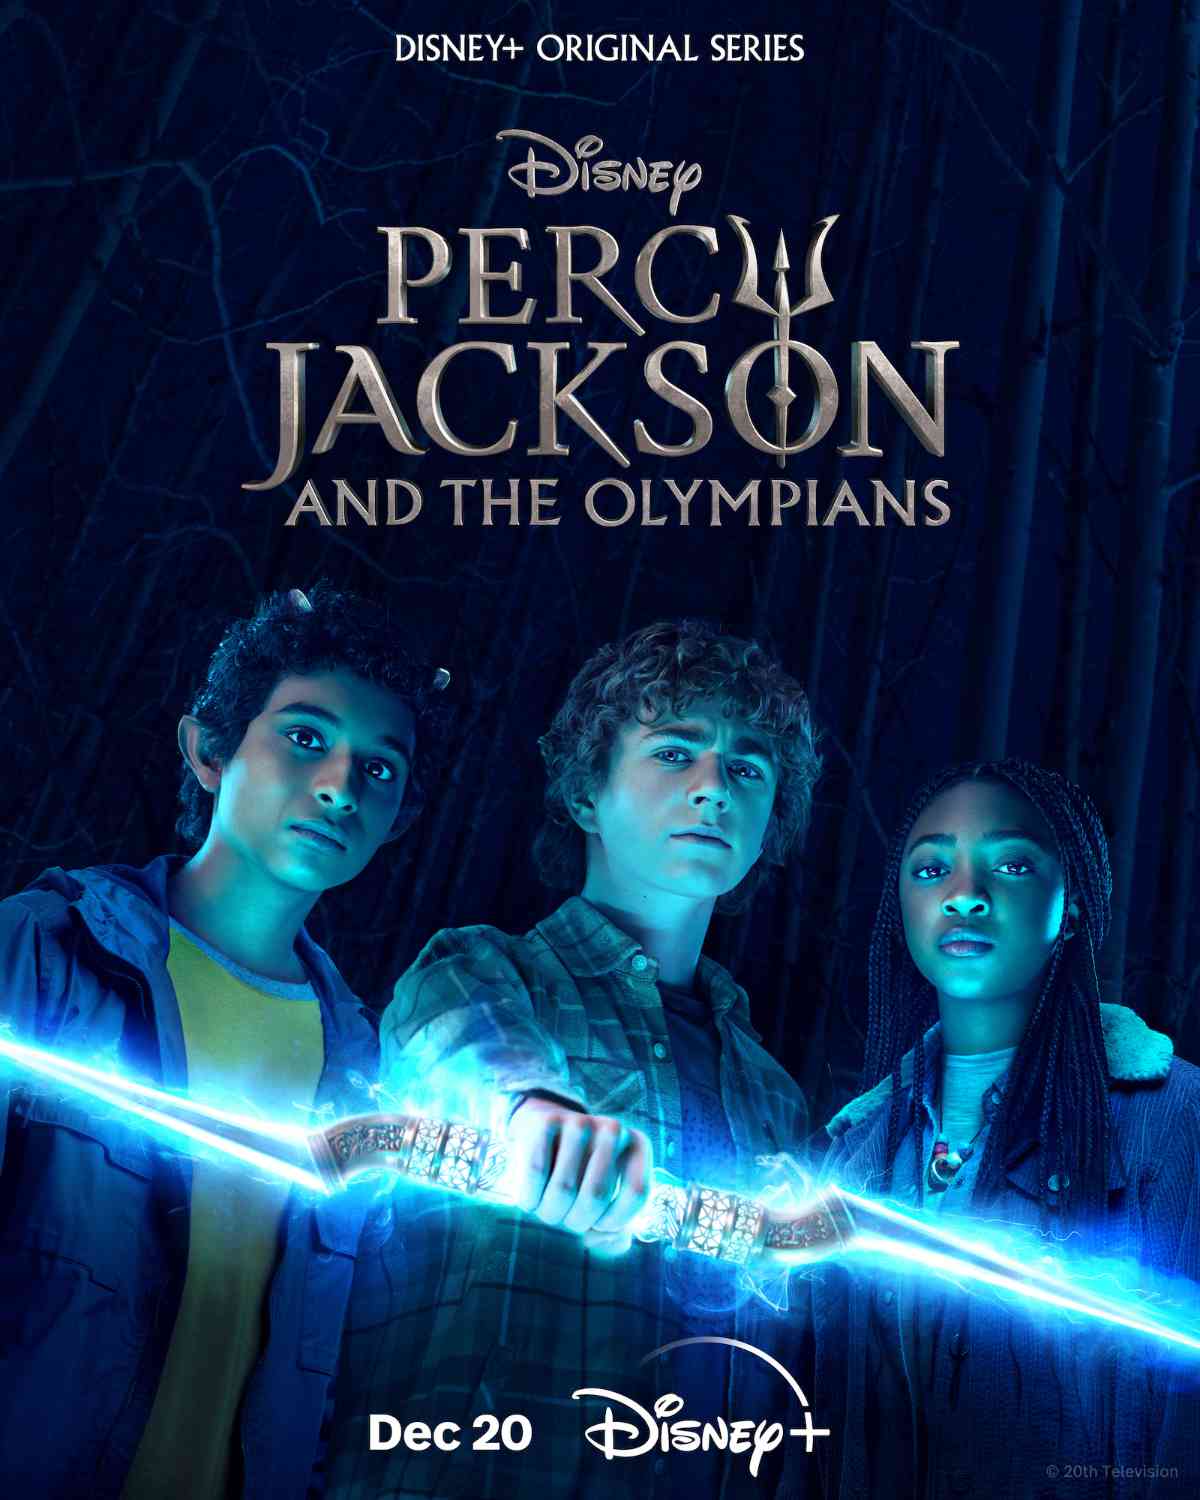 Percy Jackson and the Olympians Series Reveals Official Trailer